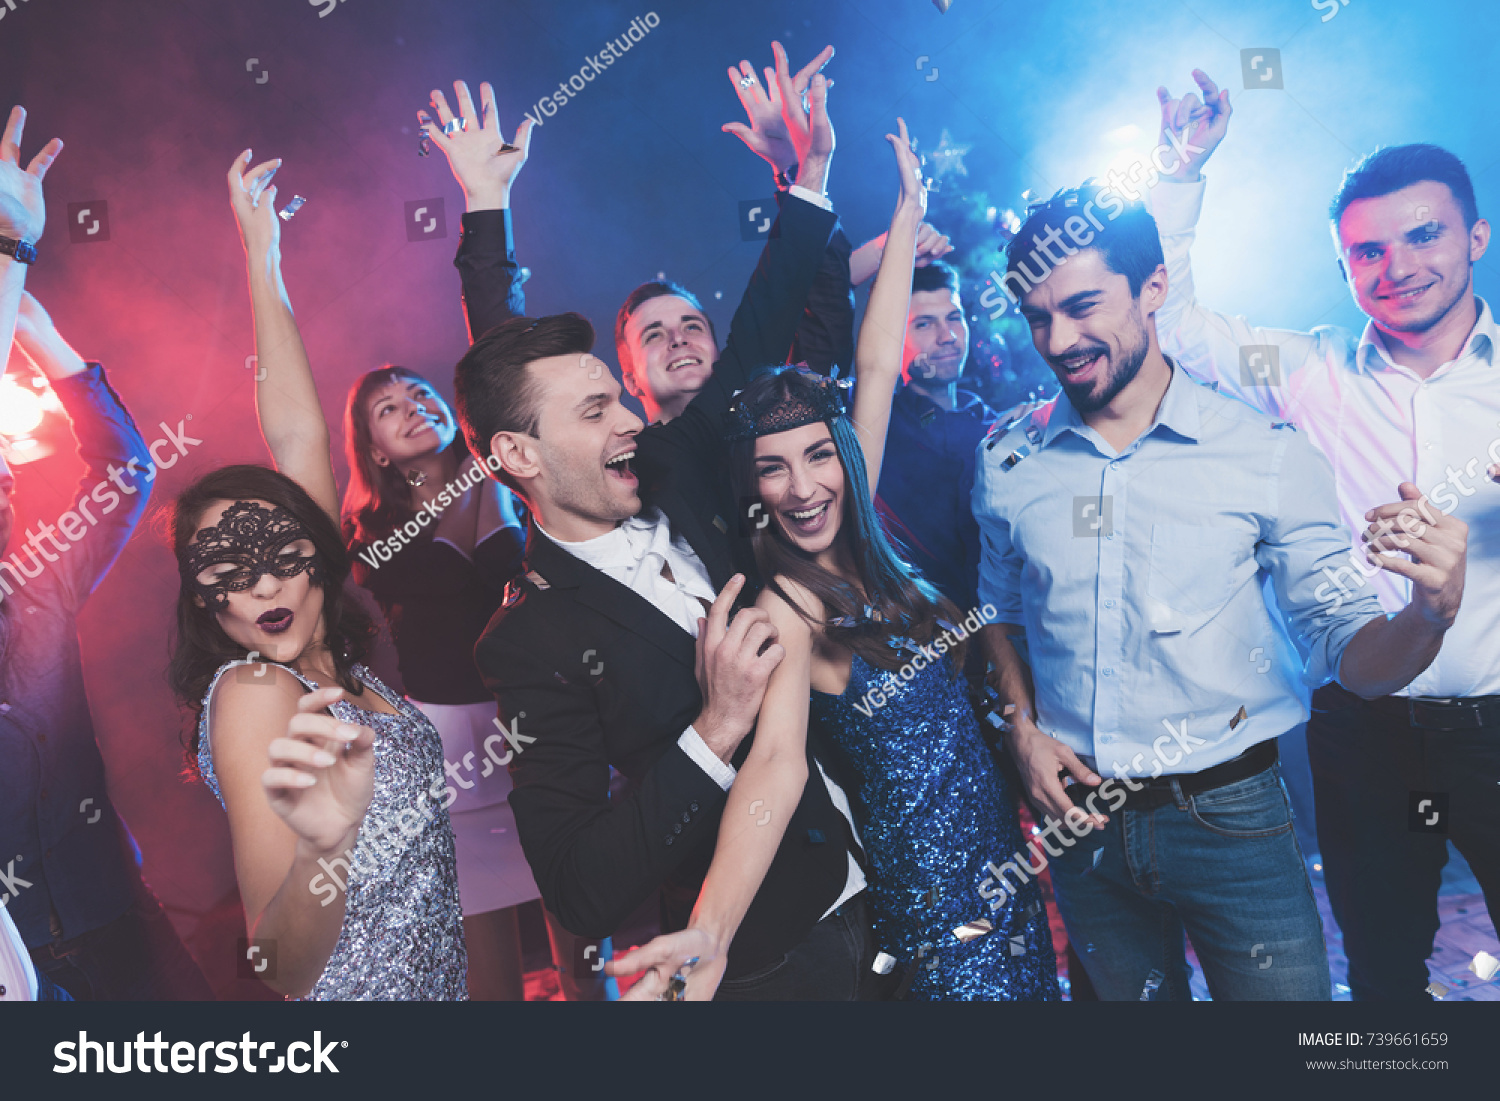 New Year party. Young couple dancing with glasses of champagne in hands. Against the background, young people's friends are dancing. Around fly confetti and there is white smoke. #739661659